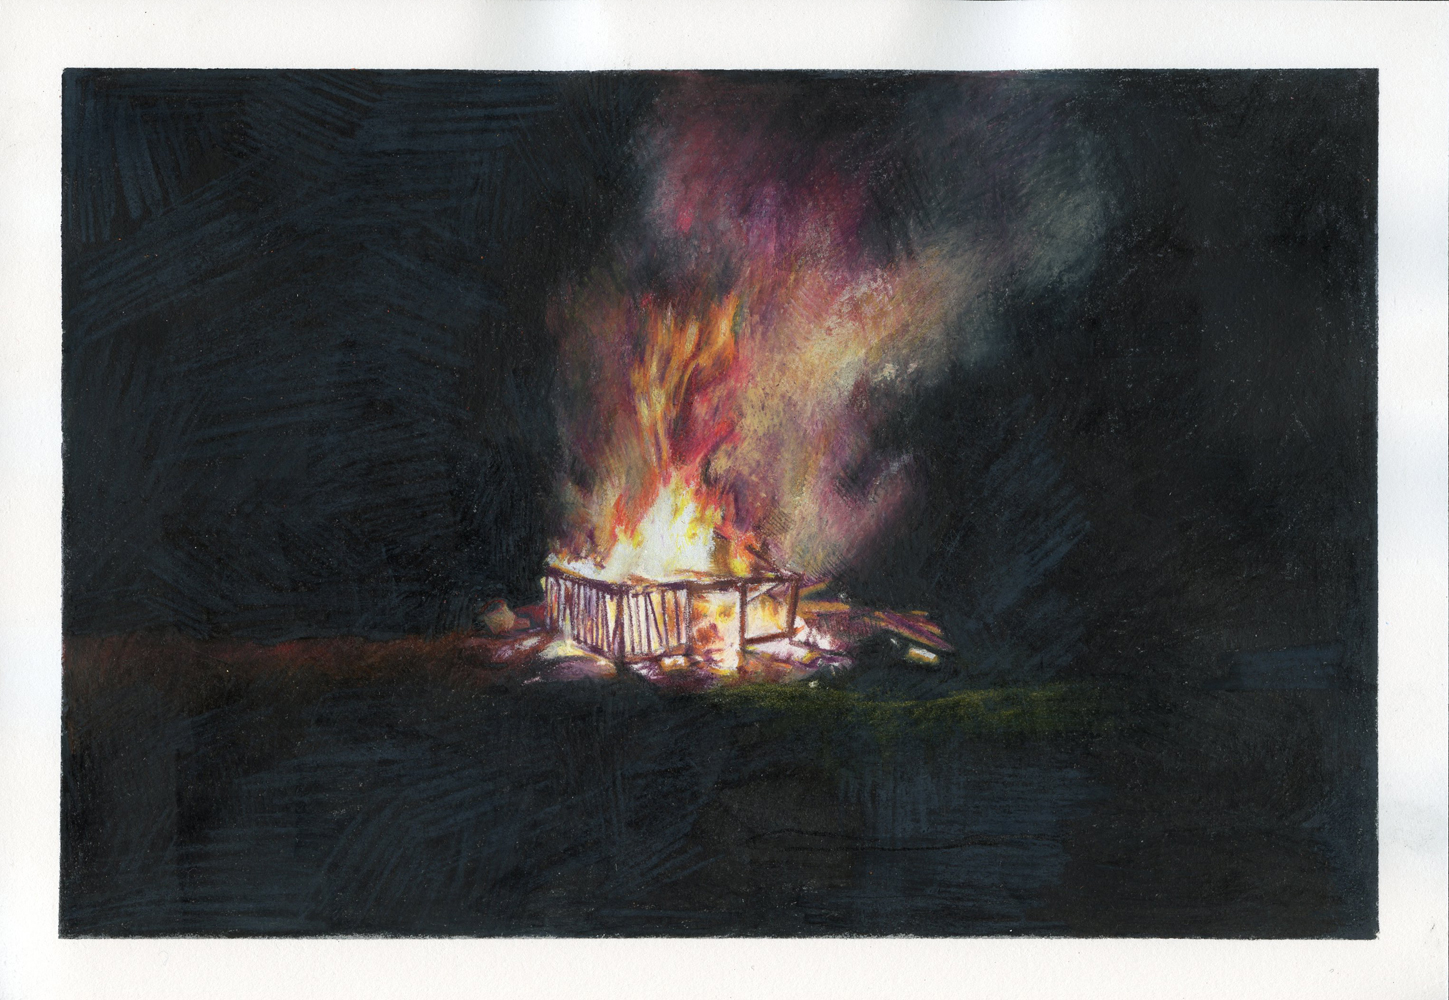 Samantha Scherer, Shedfire, 2021, colored pencil on paper, 7 x 10 inches $600.